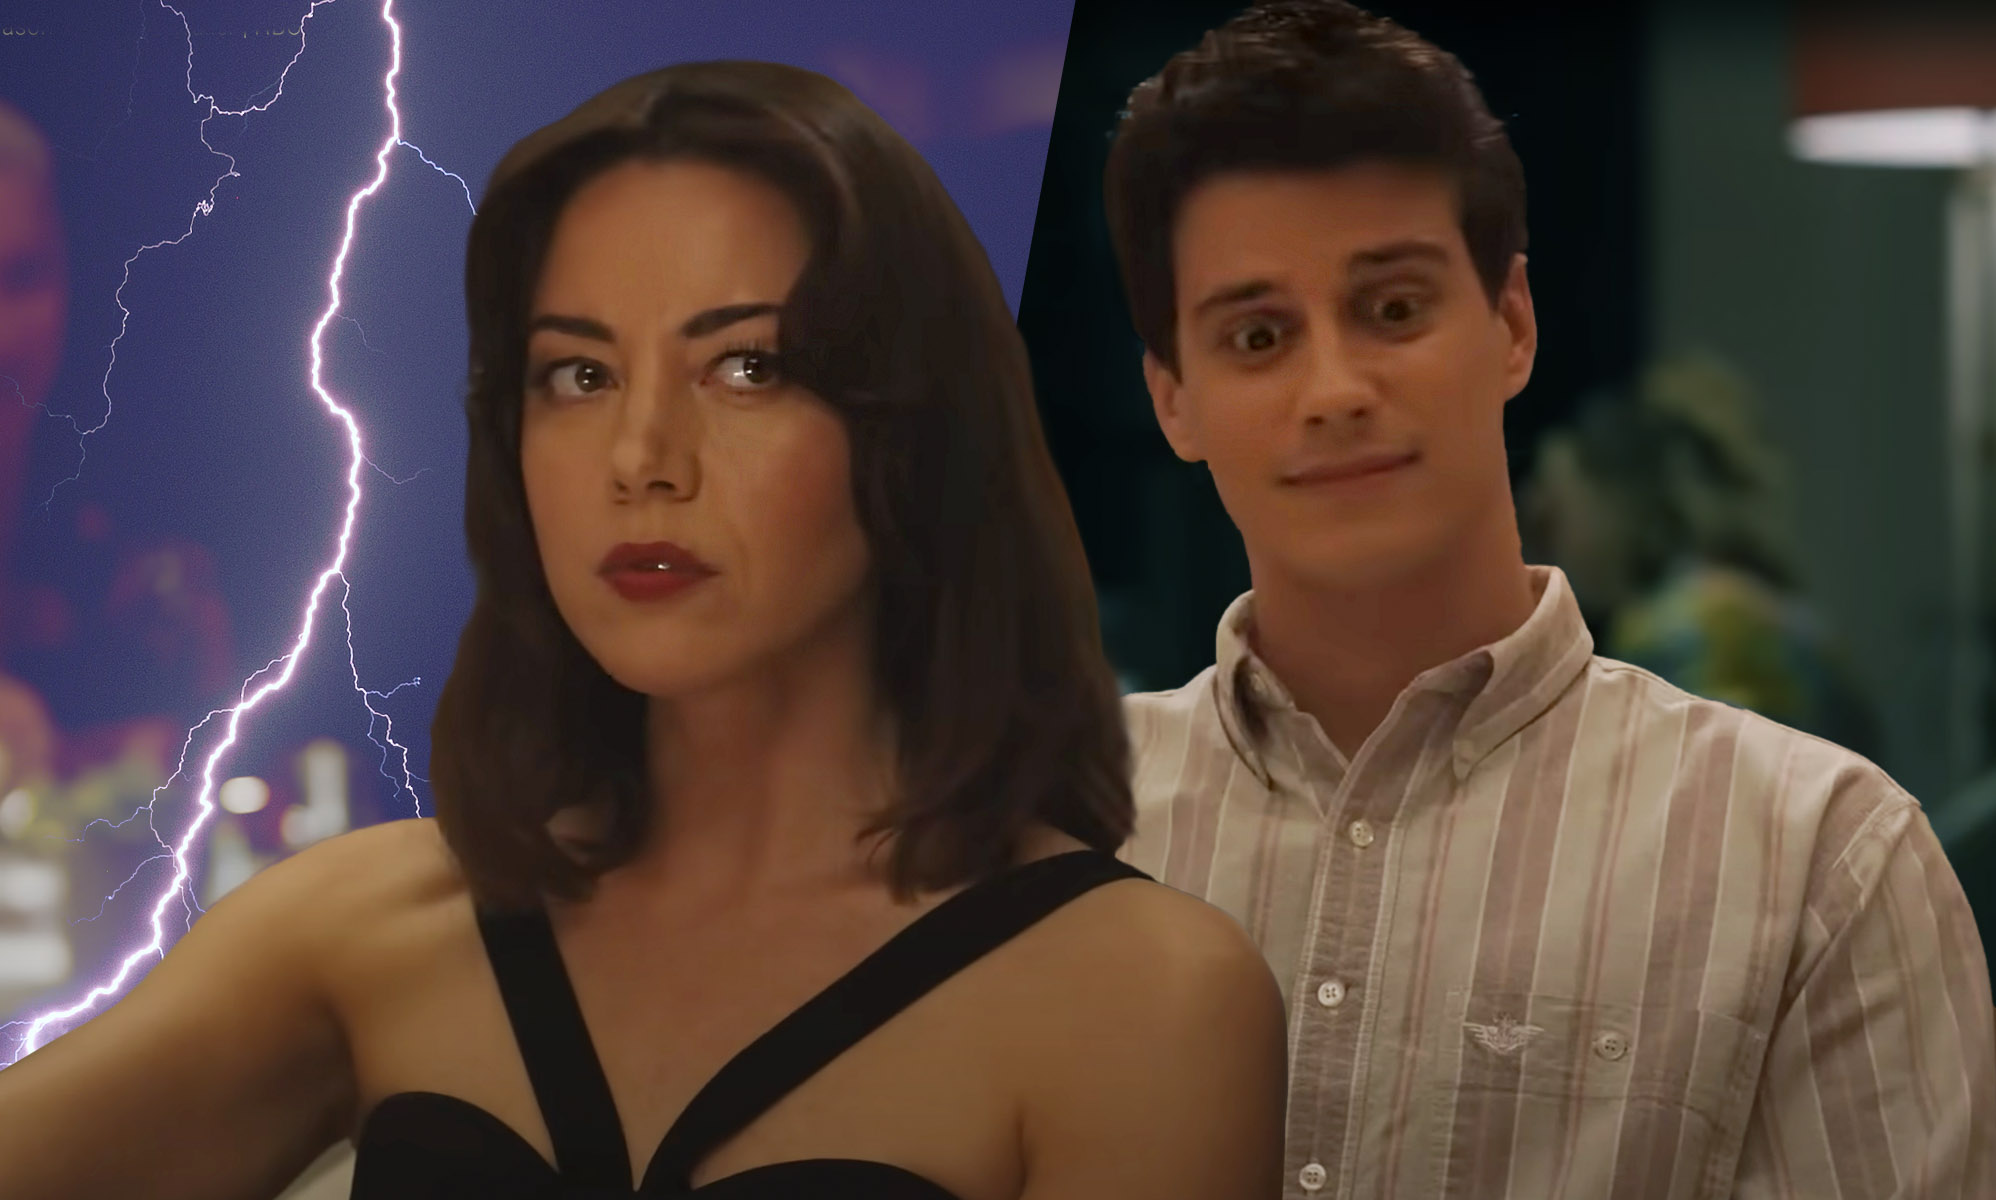 The White Lotus' Aubrey Plaza Wants This to Be Her Next Gig